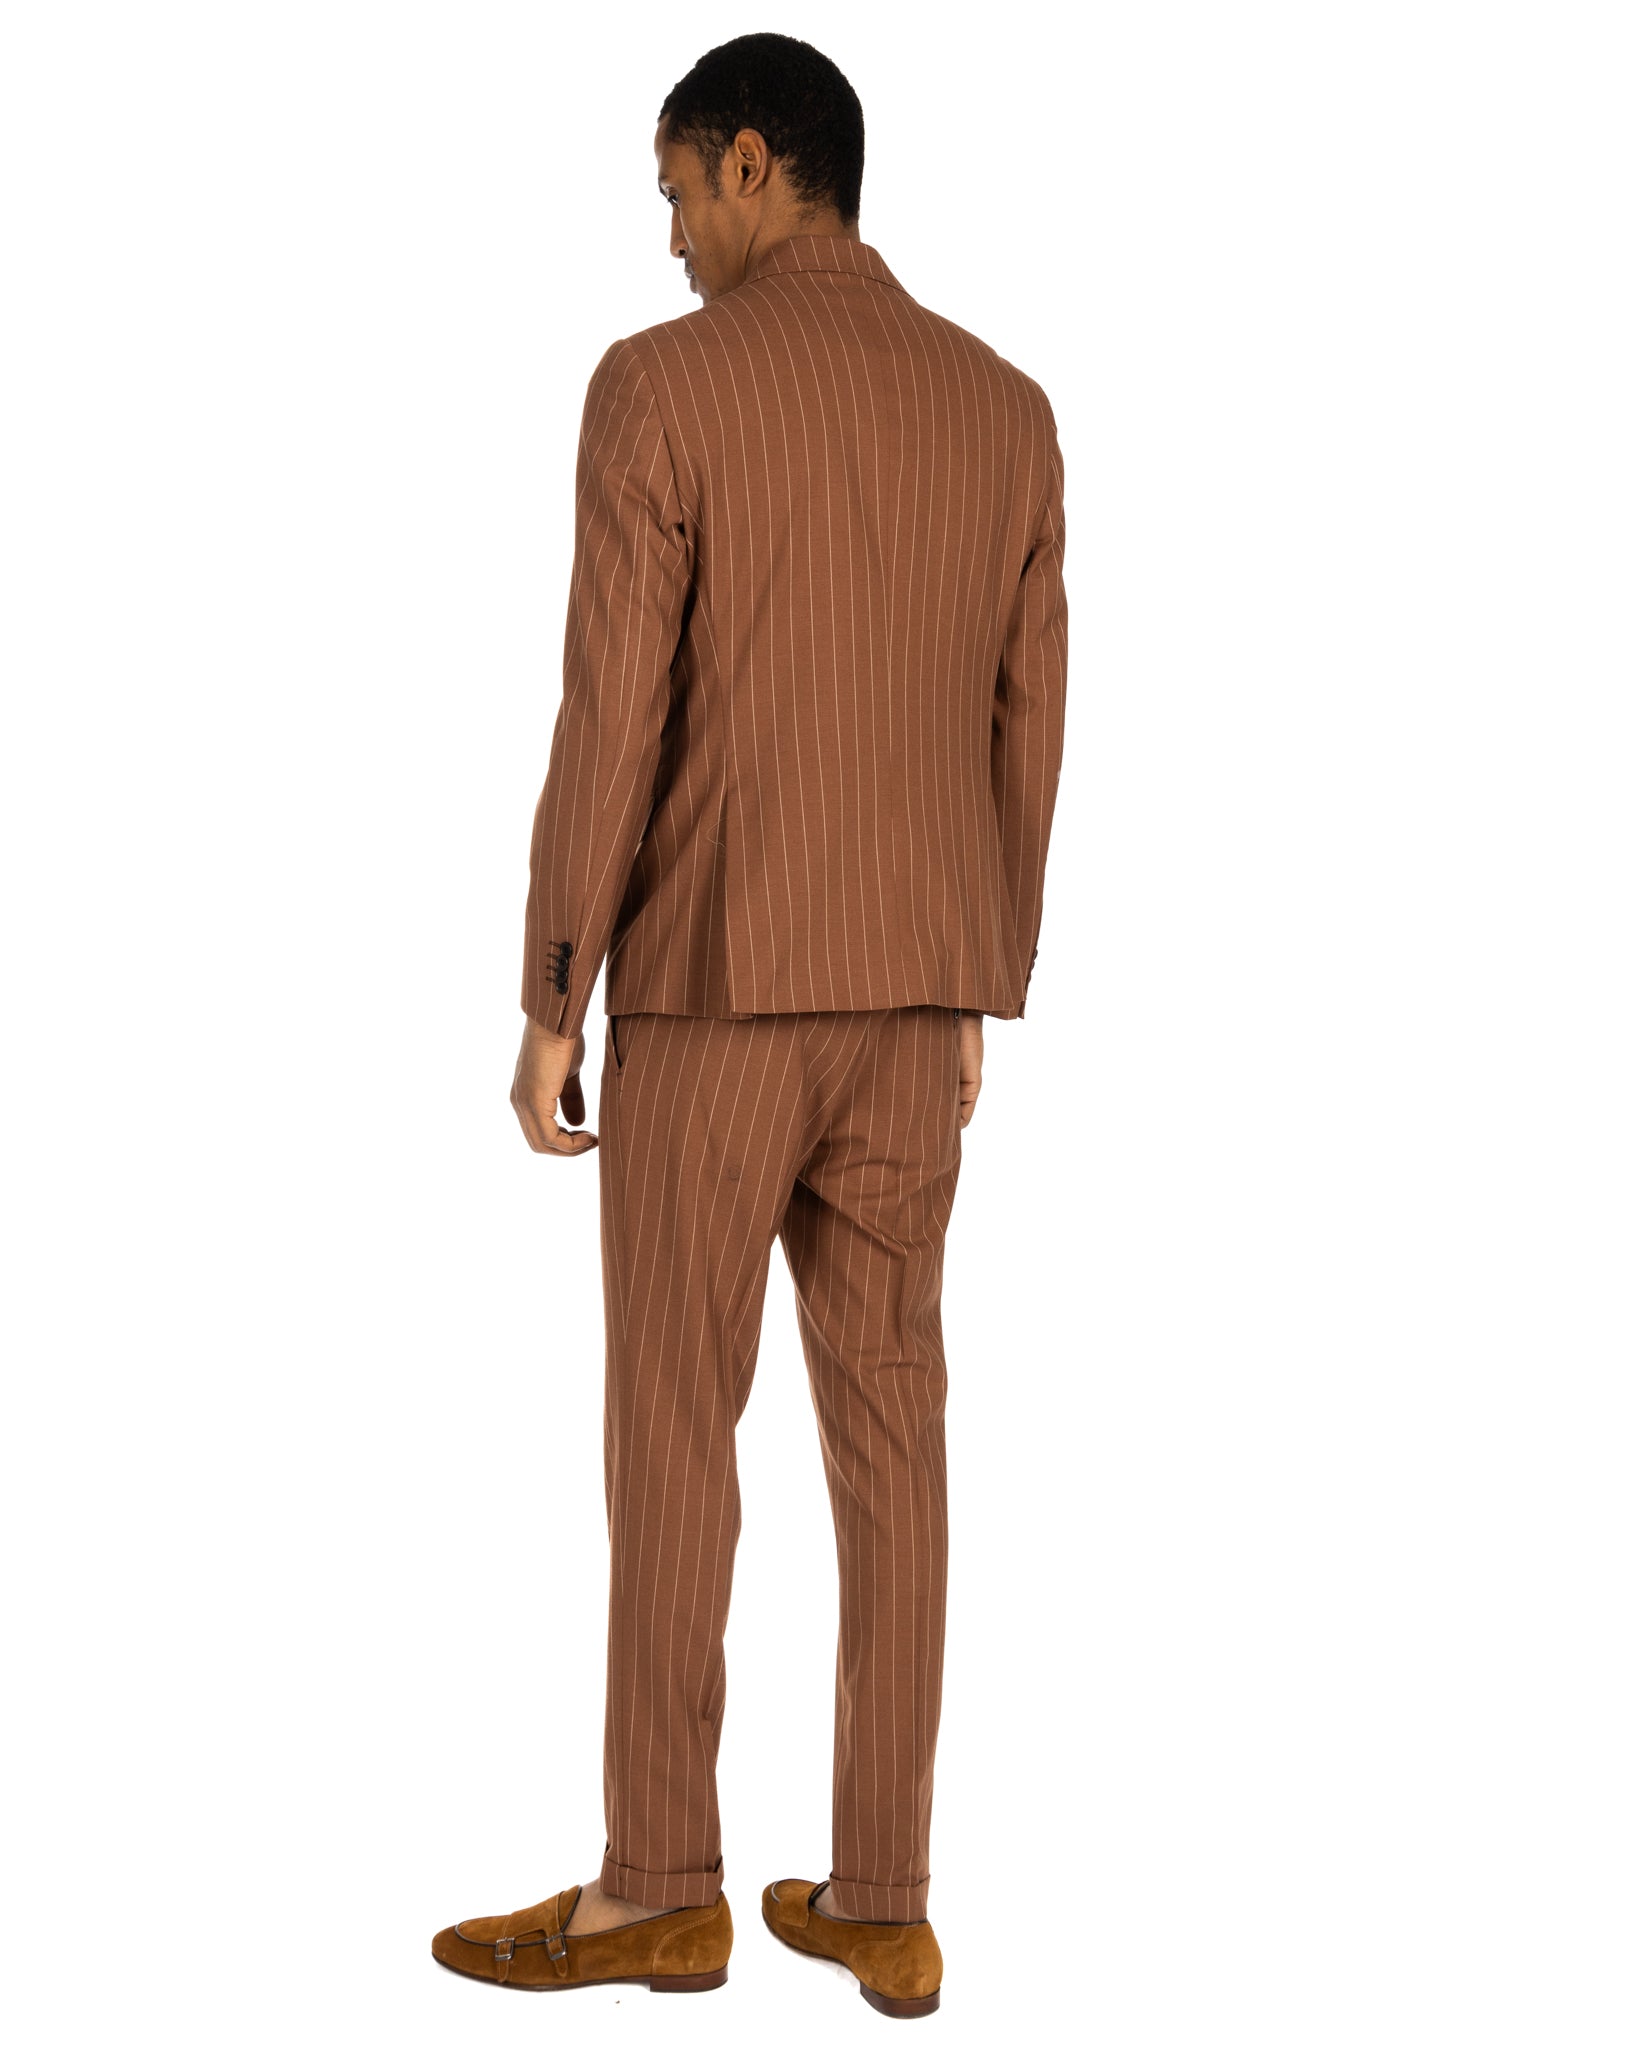 Lille - single-breasted tobacco pinstriped suit